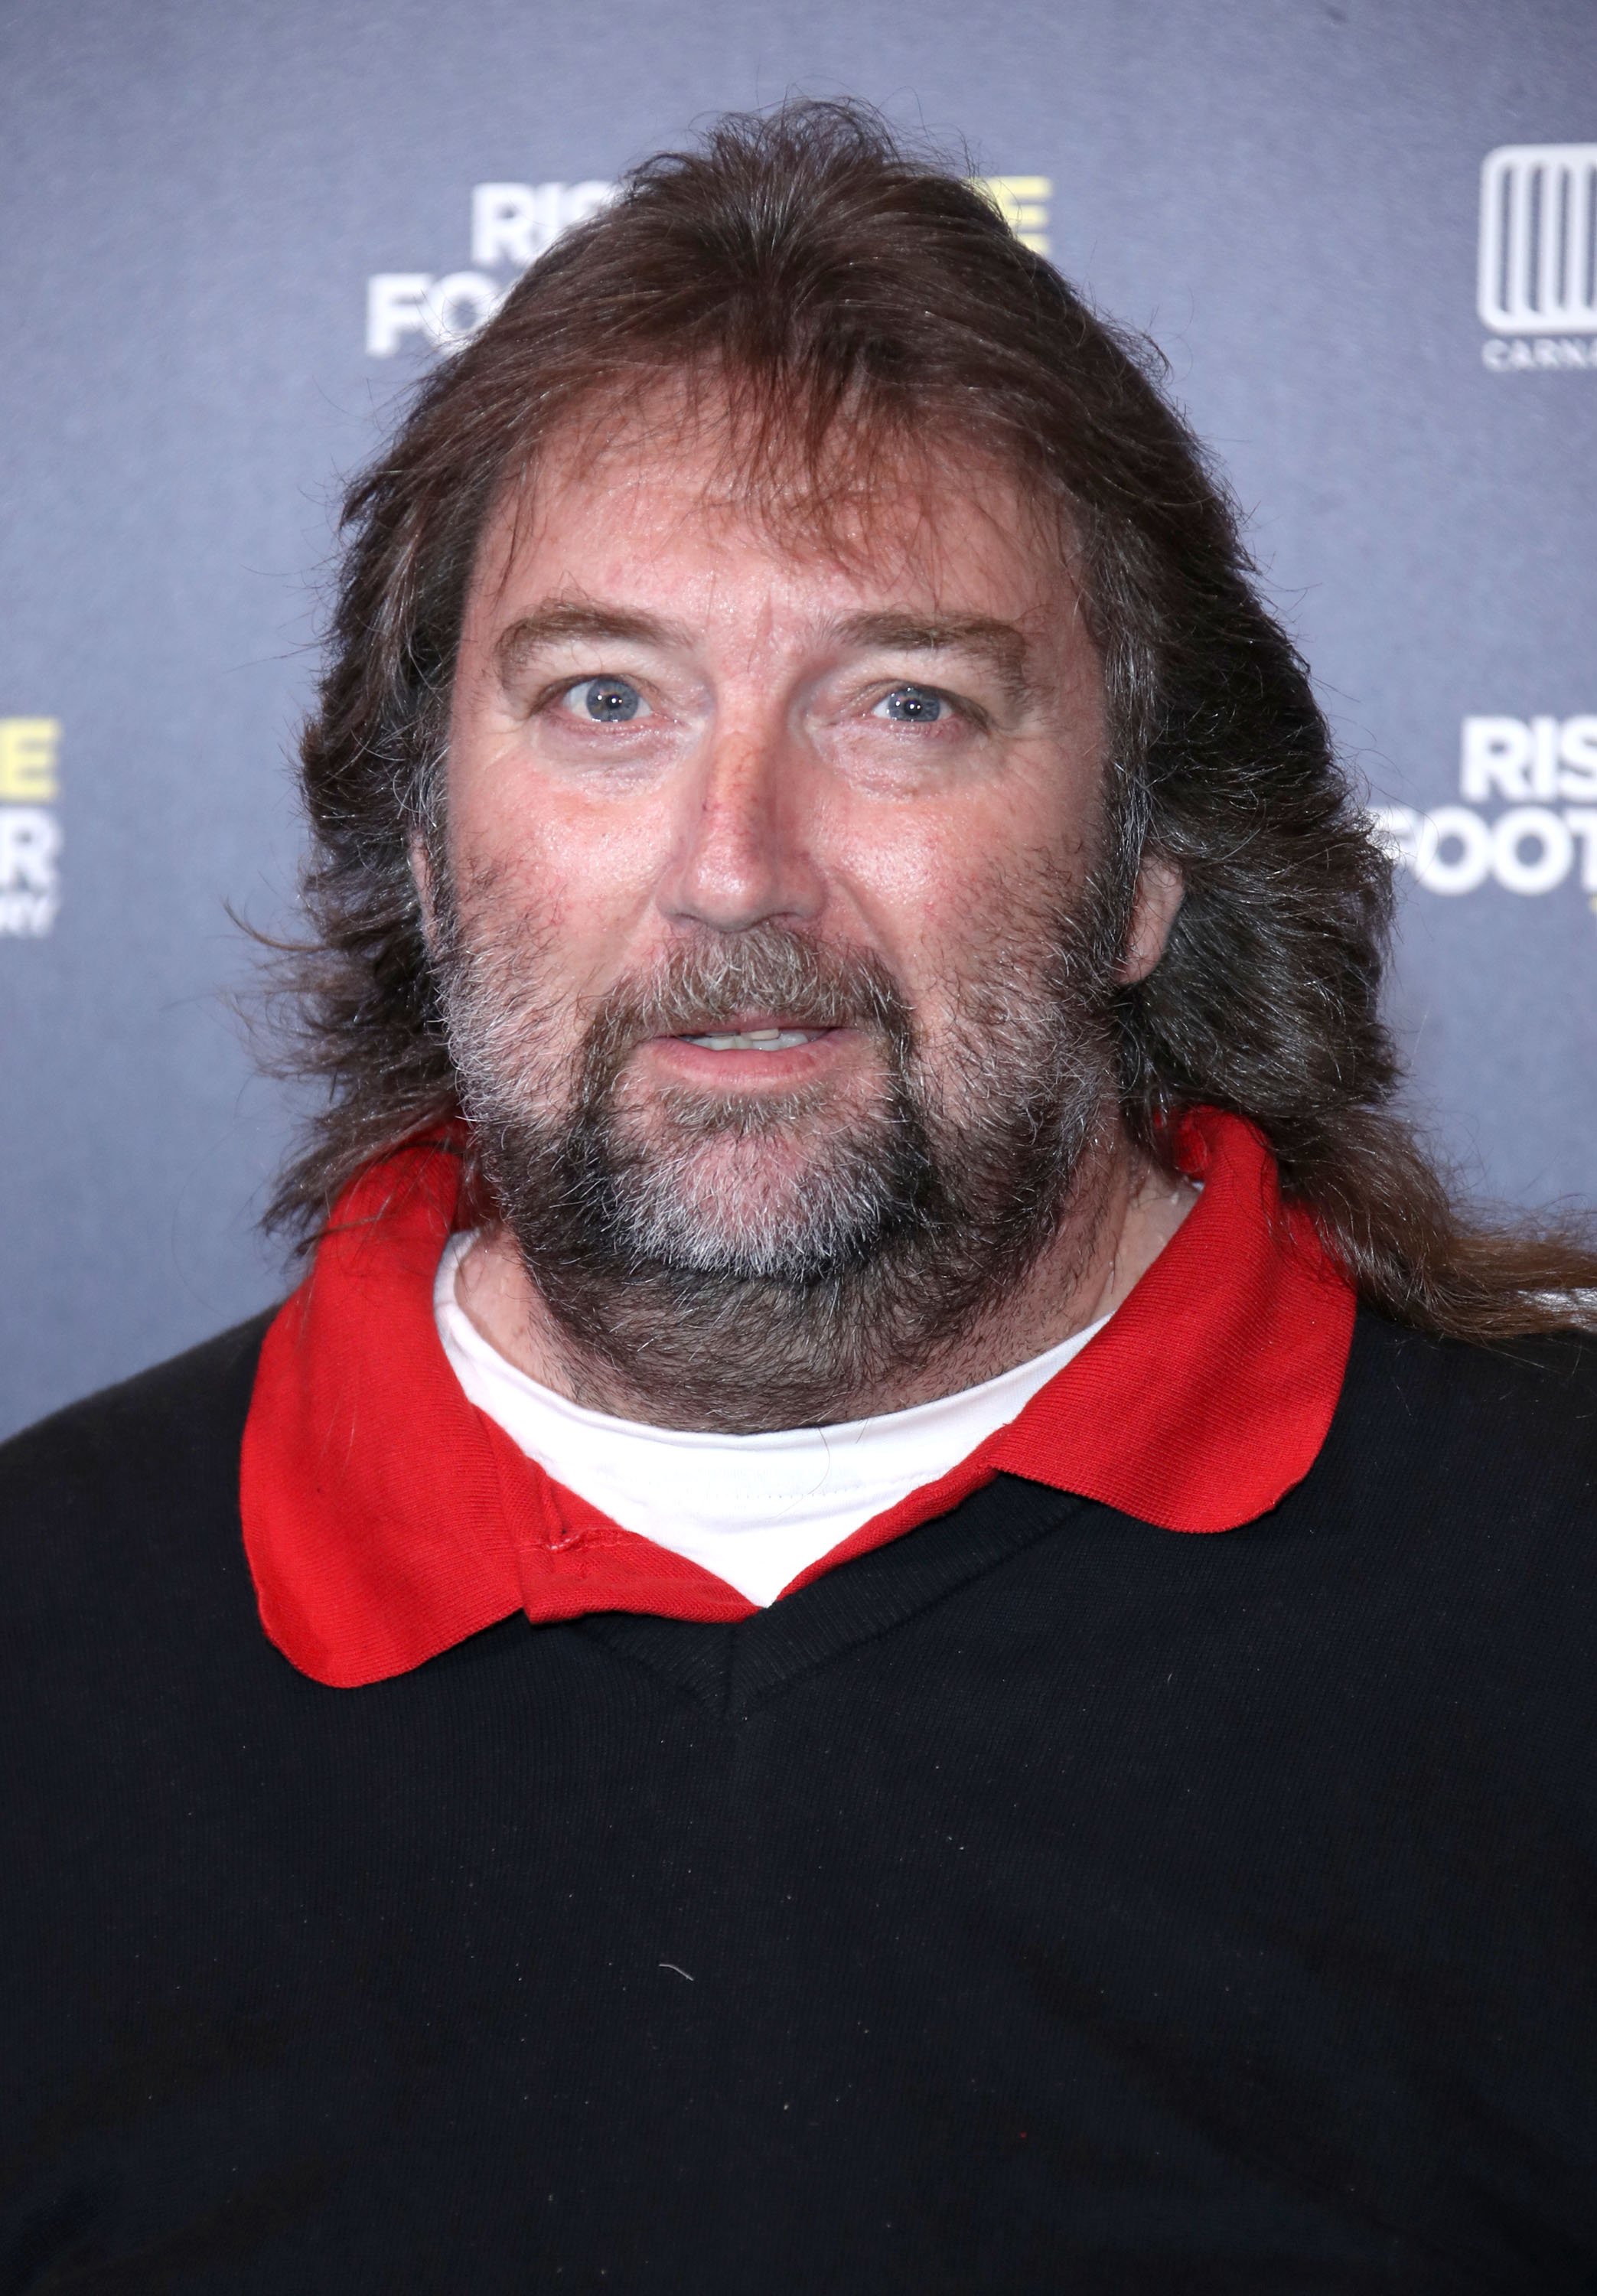 Andy Fordham arriving at the UK Premiere of 'Rise of the Footsoldier 3: The Pat Tate Story' at Cineworld Leicester Square on October 26, 2017 in London, England. | Source: Getty Images